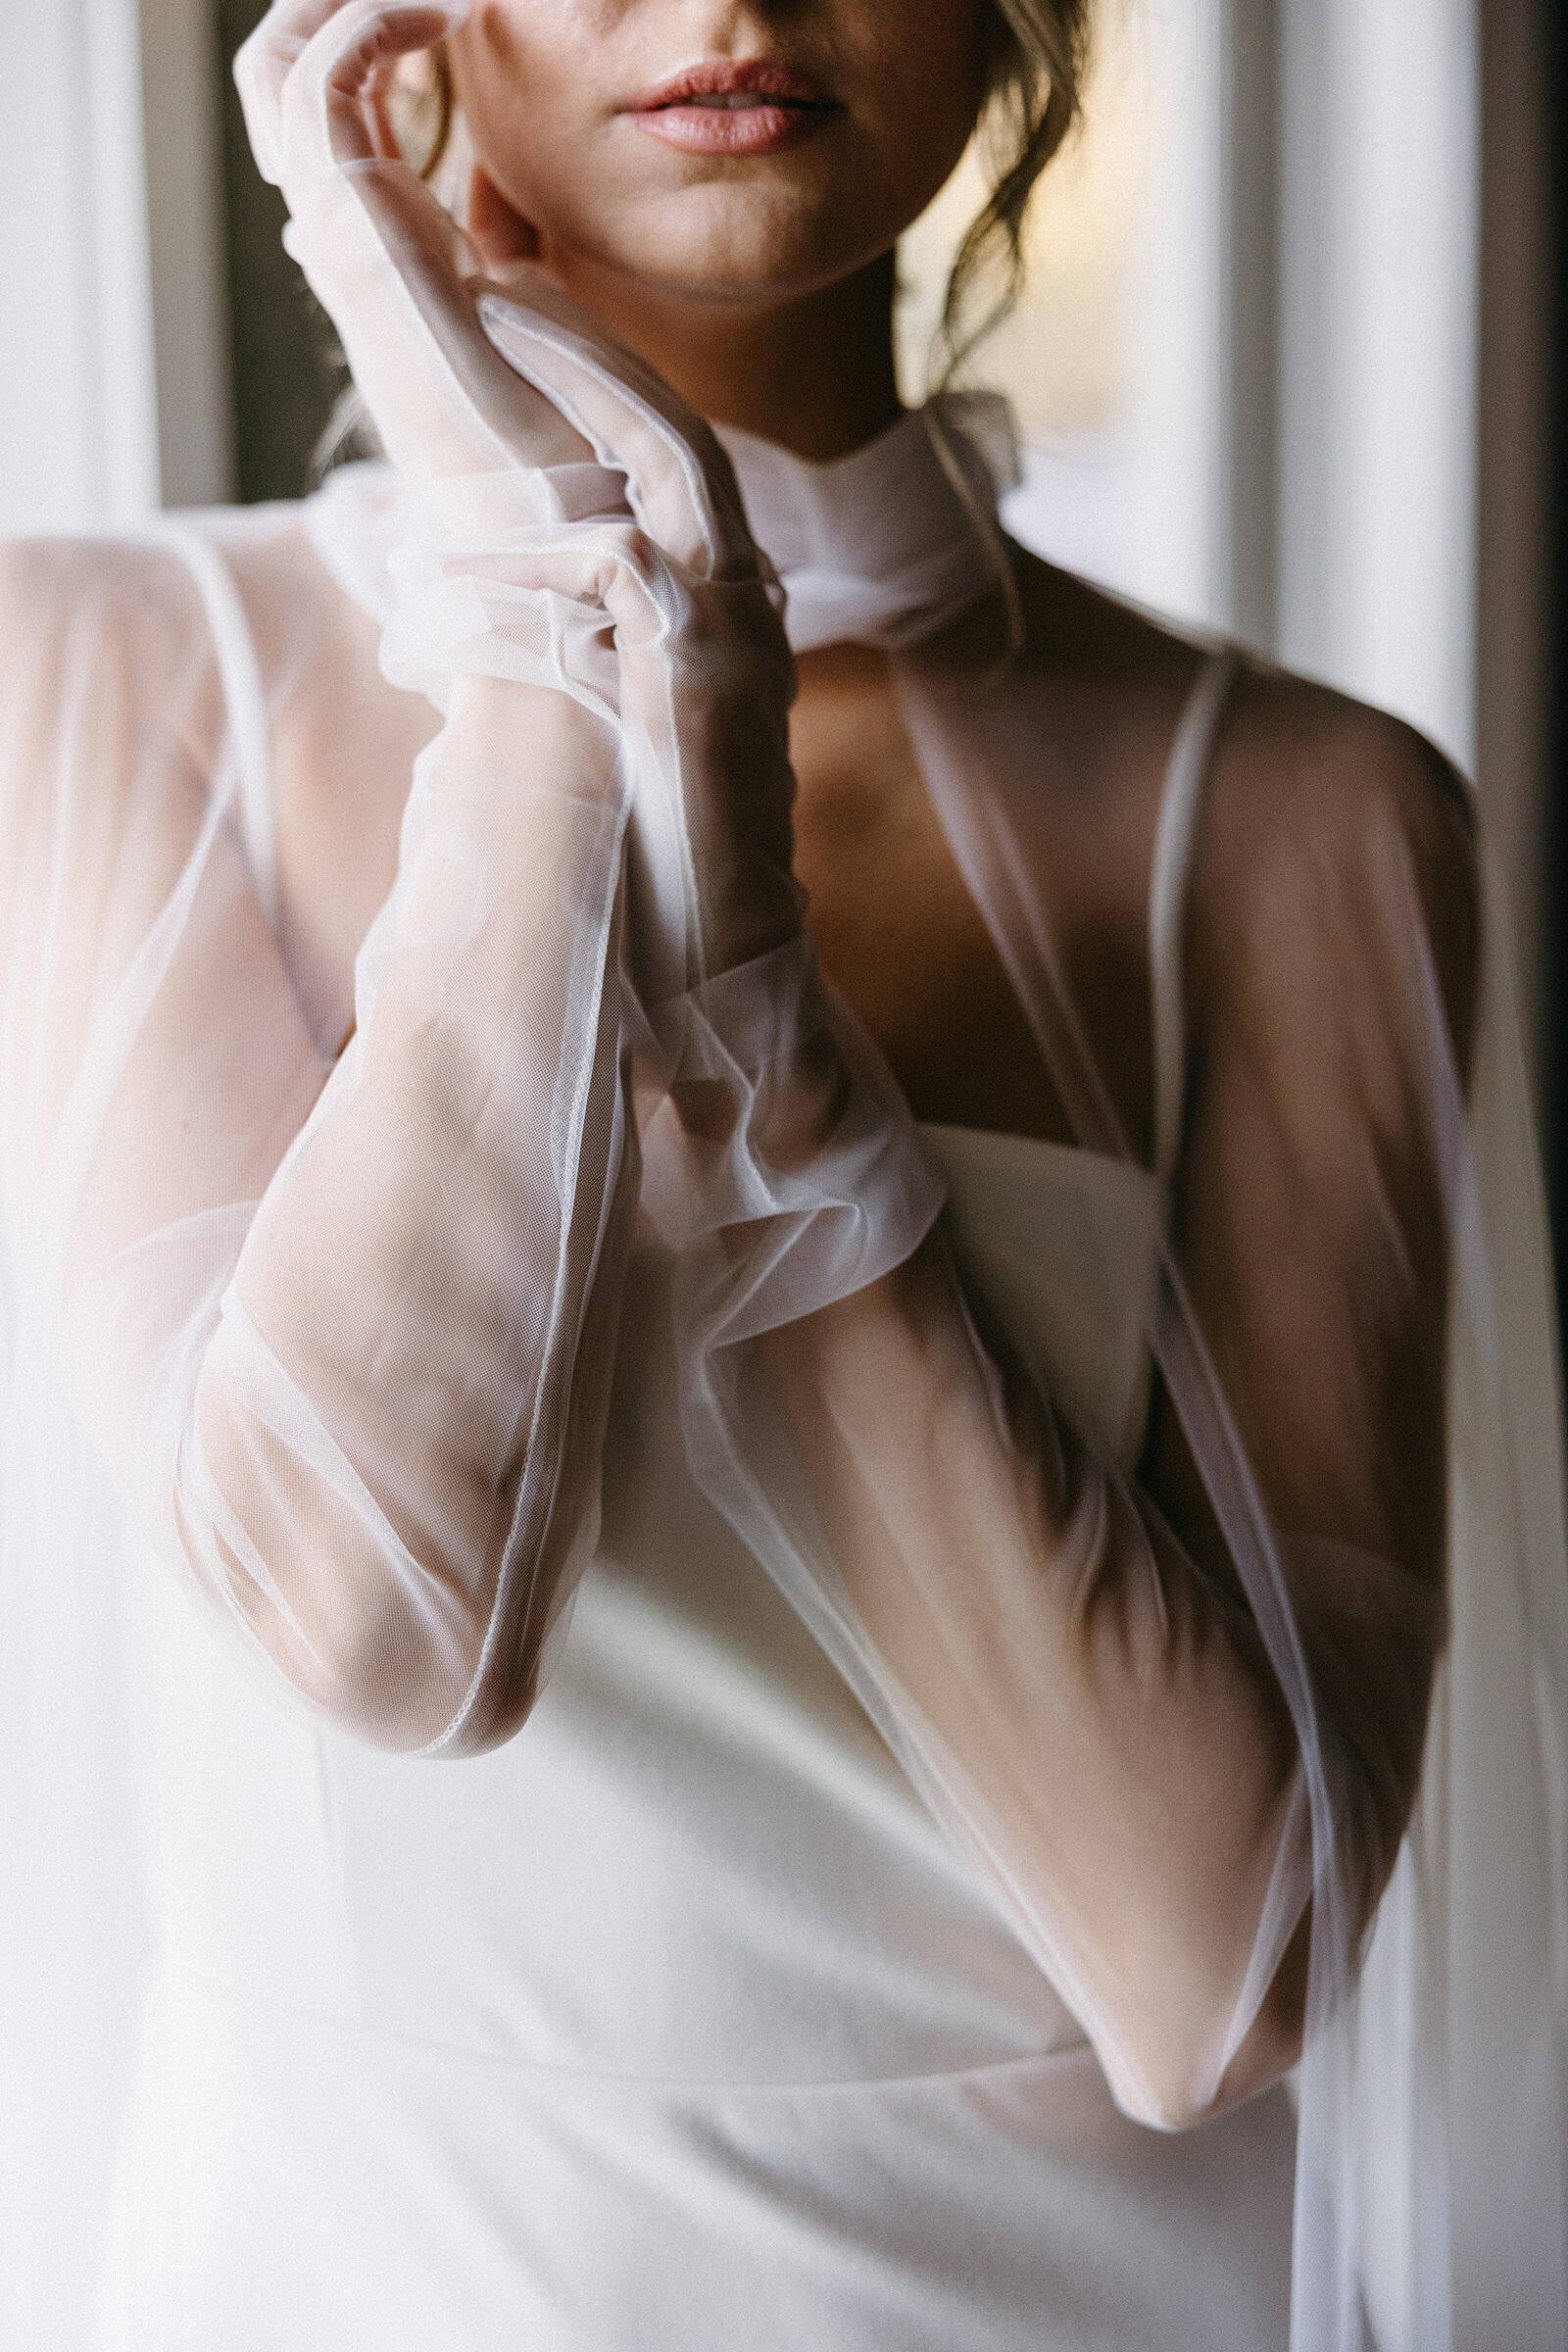 bridal photos with bride wearing gloves